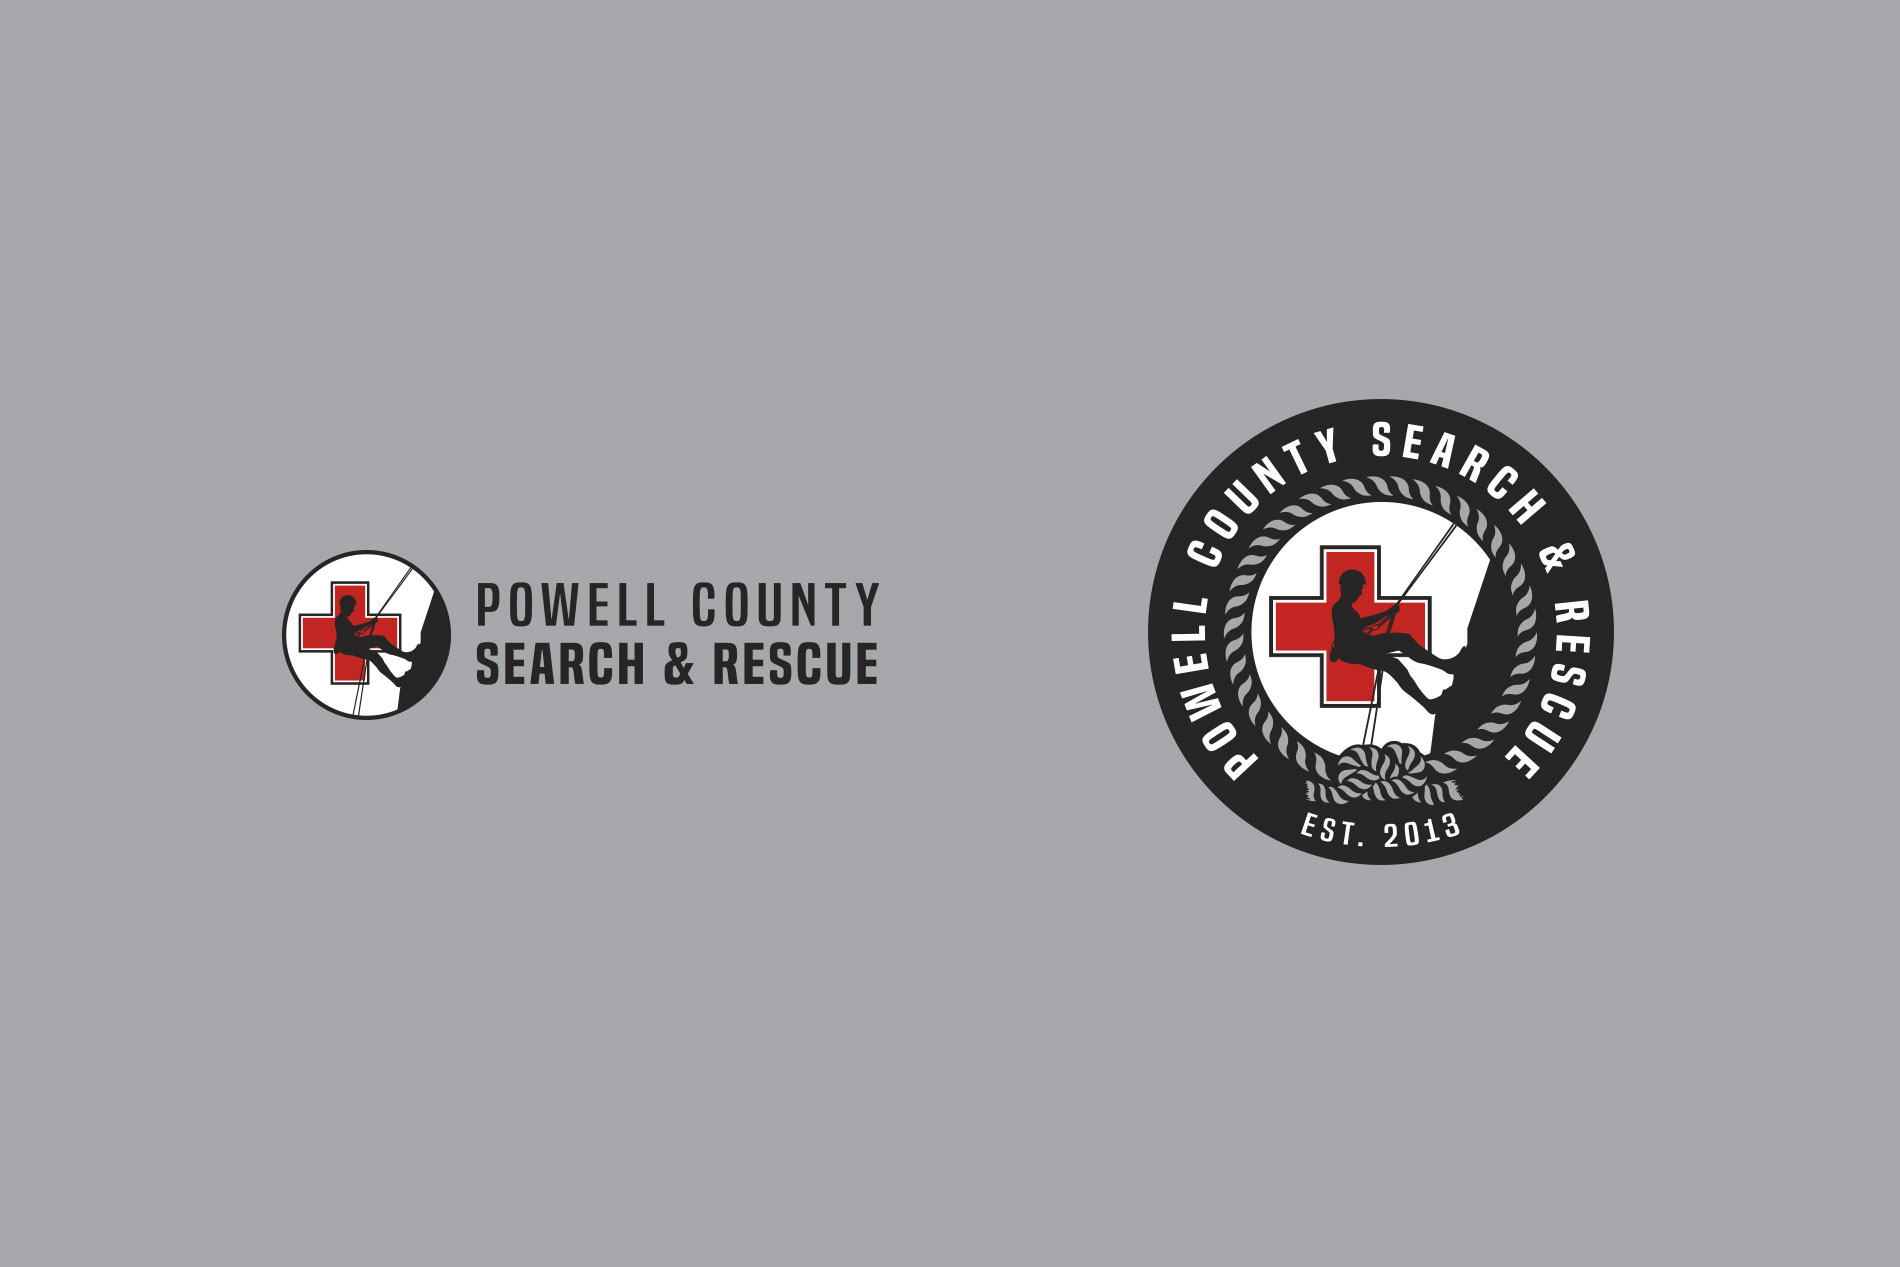 powell county search & rescue